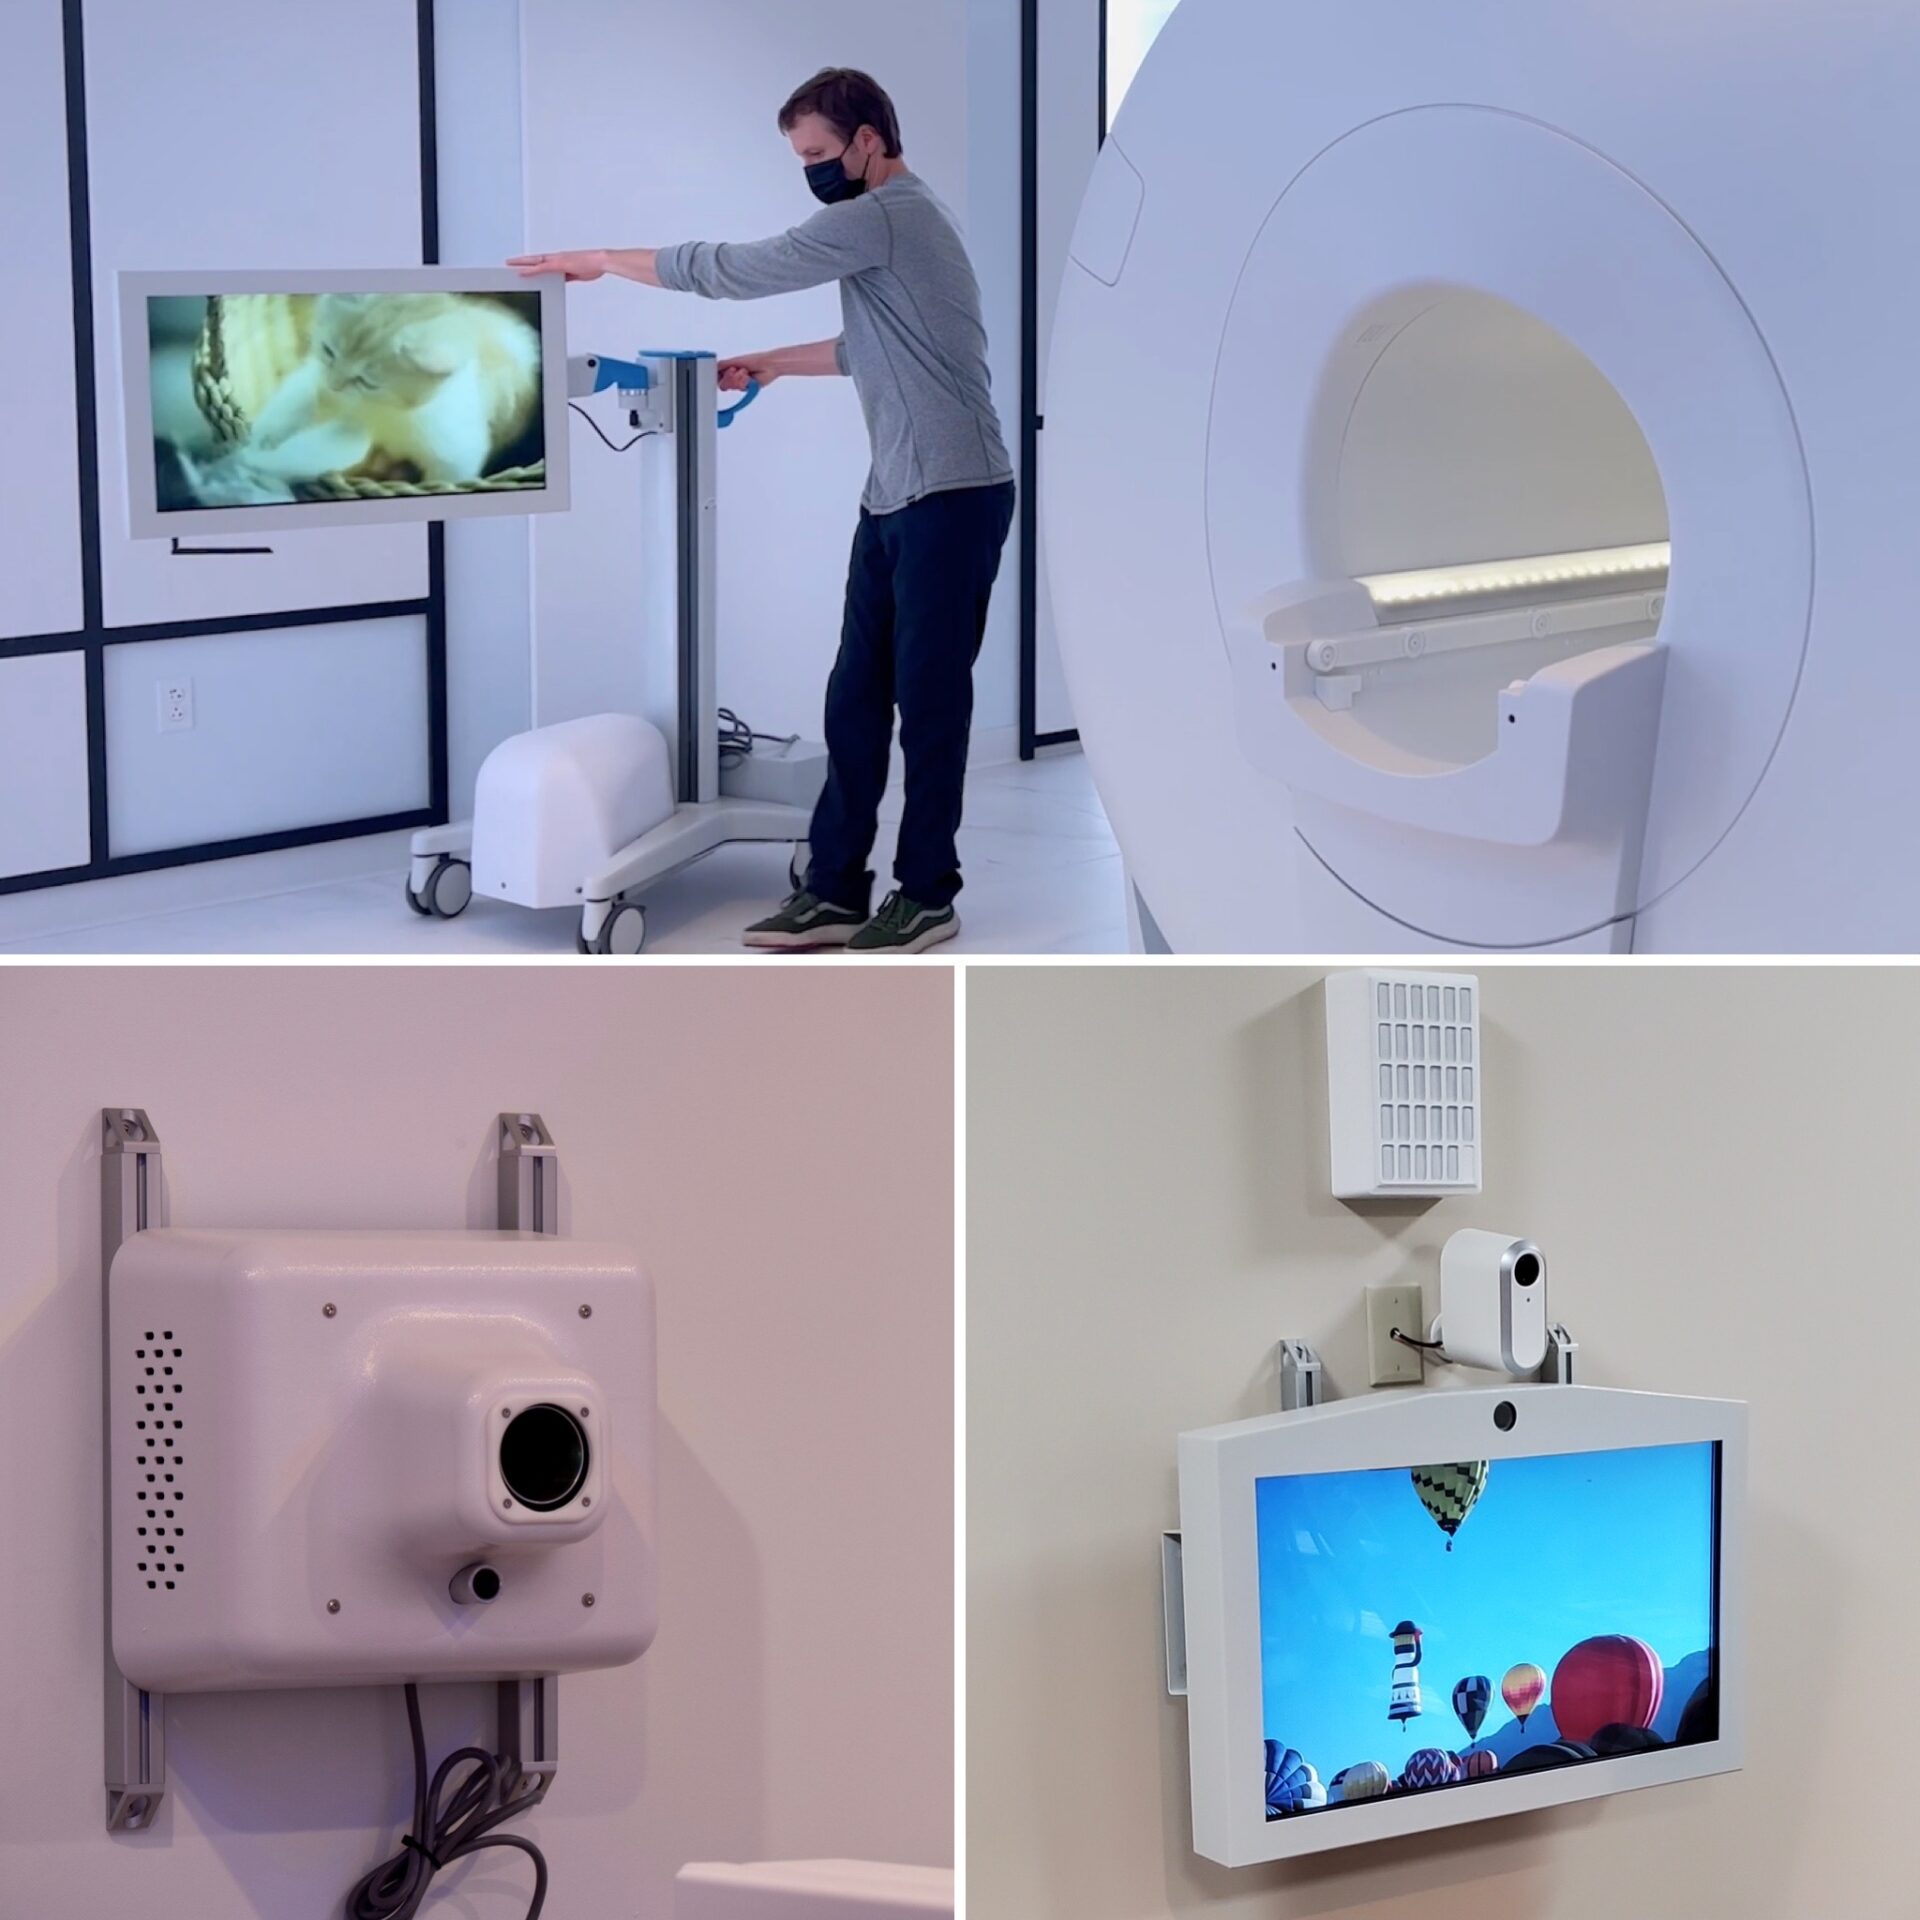 MRI In-Bore Viewing Solutions - Wireless Portable Video Display, Projector and Wall-Mount Video Display